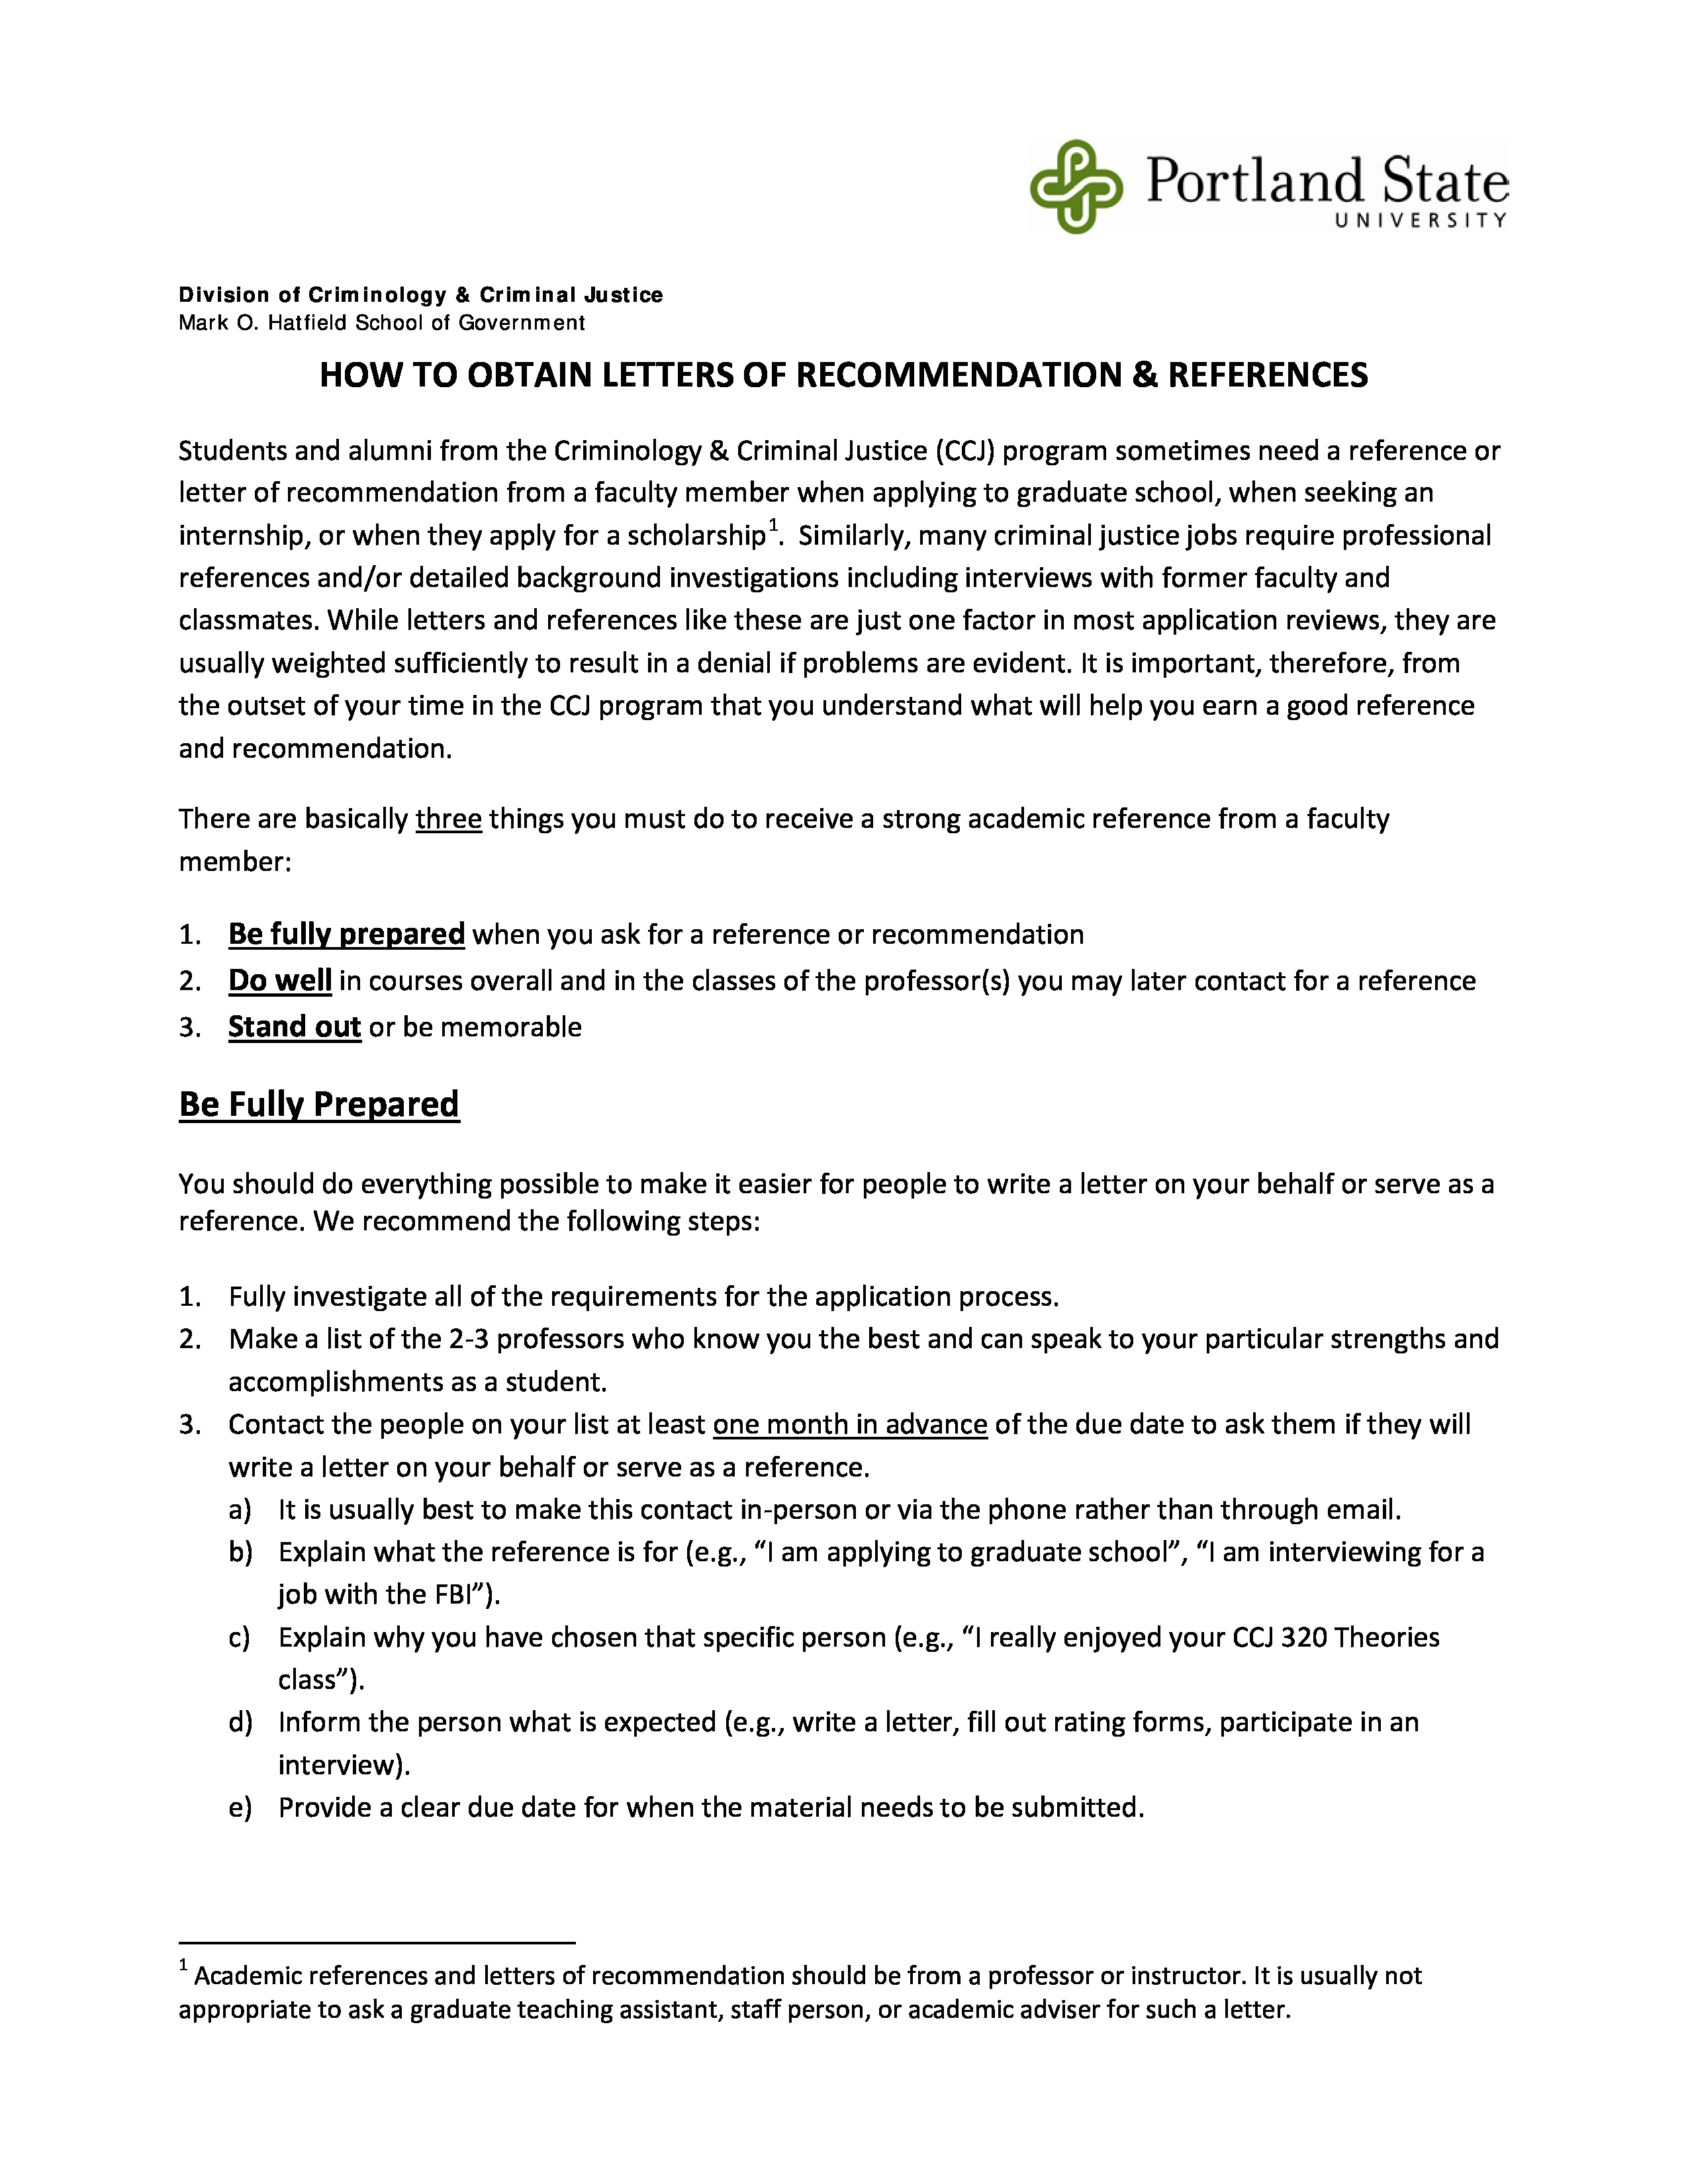 Law School Recommendation Letter Unique Re Mendation Letter for Grad School From Employer with